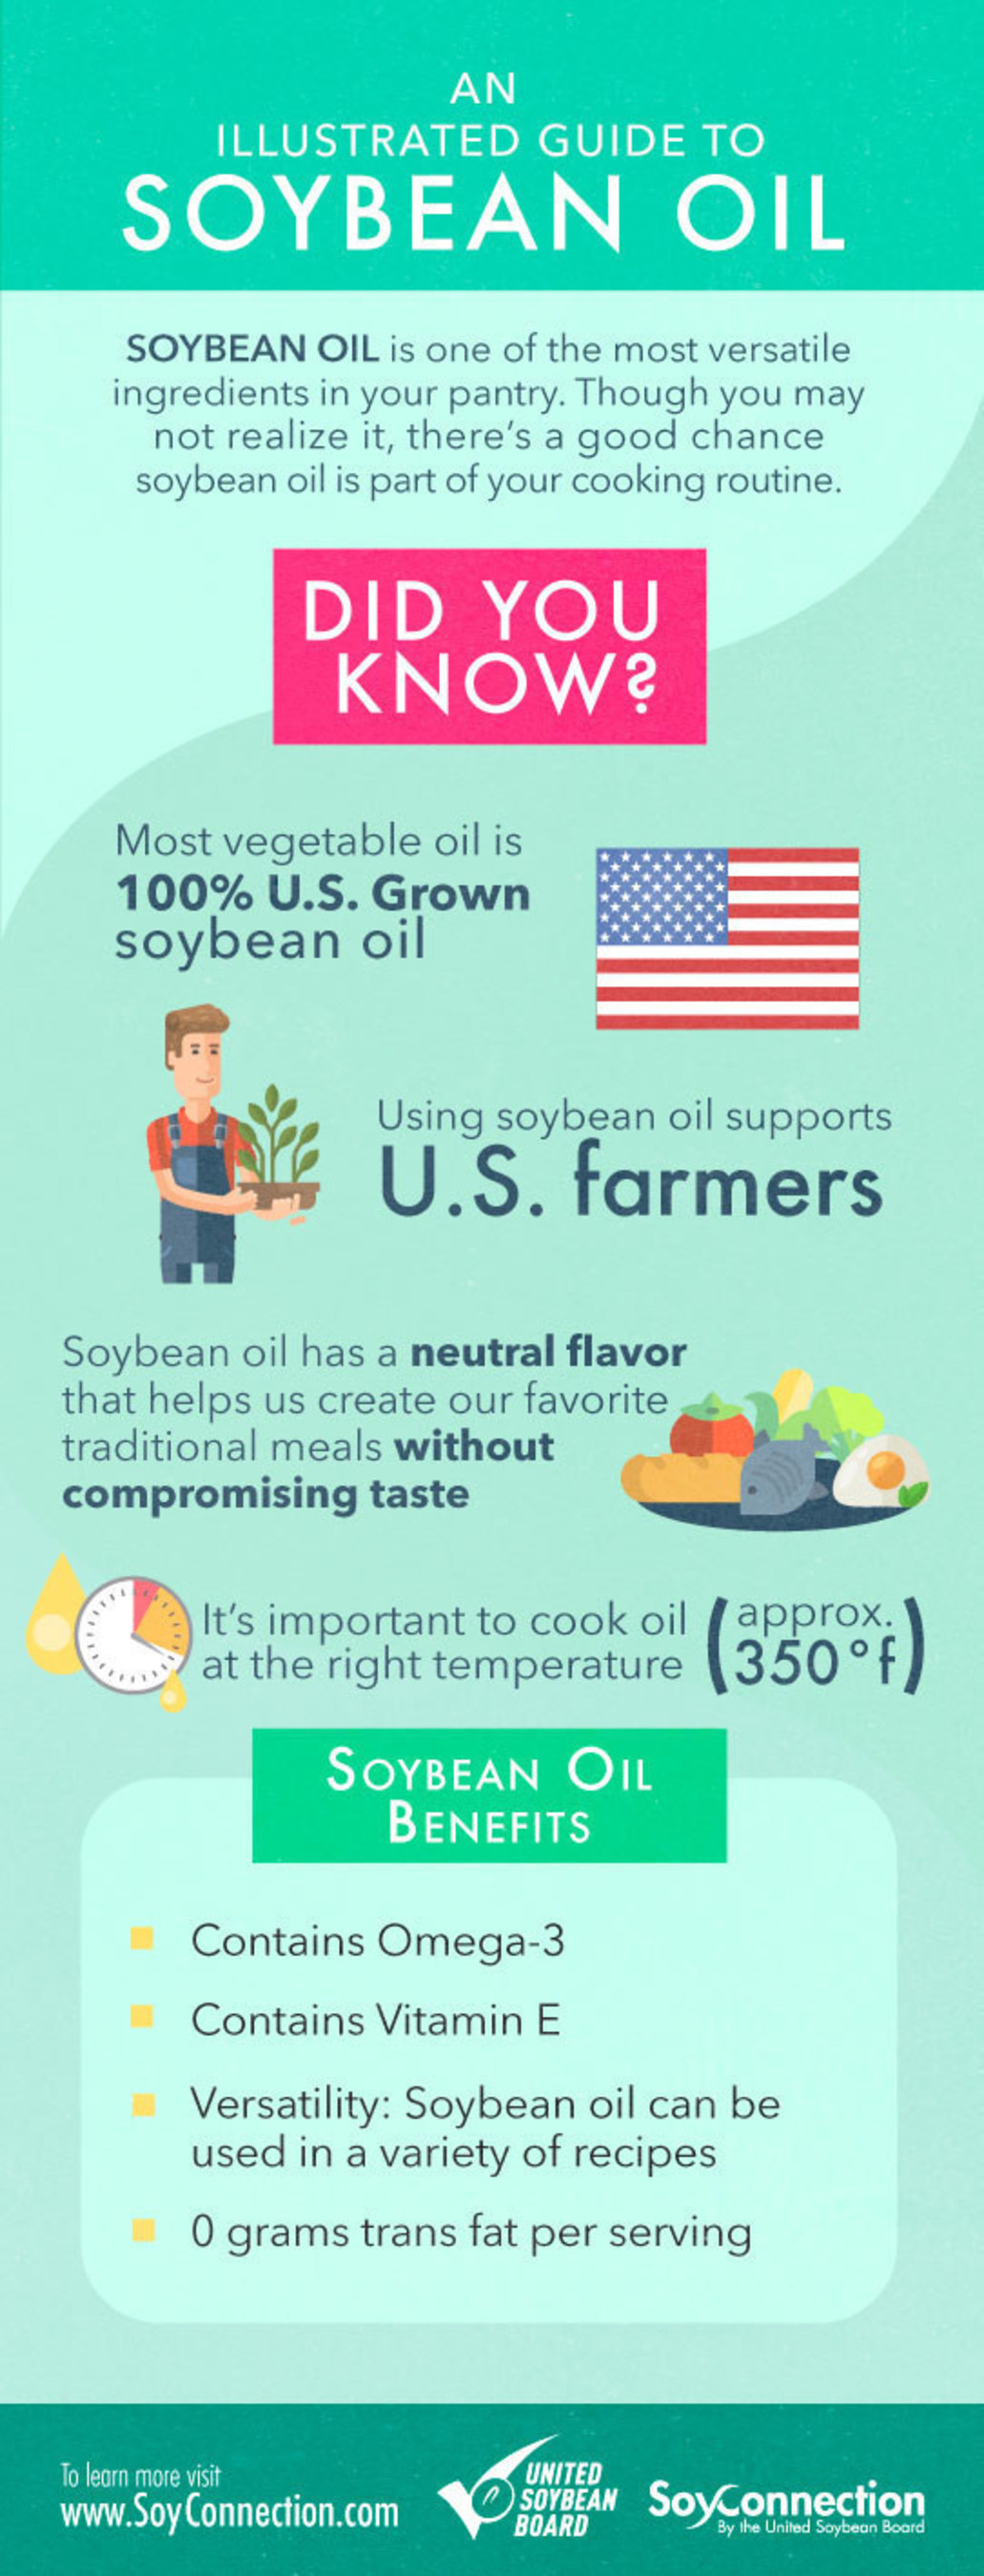 100% U.S. Grown soybean oil is versatile and contains many benefits